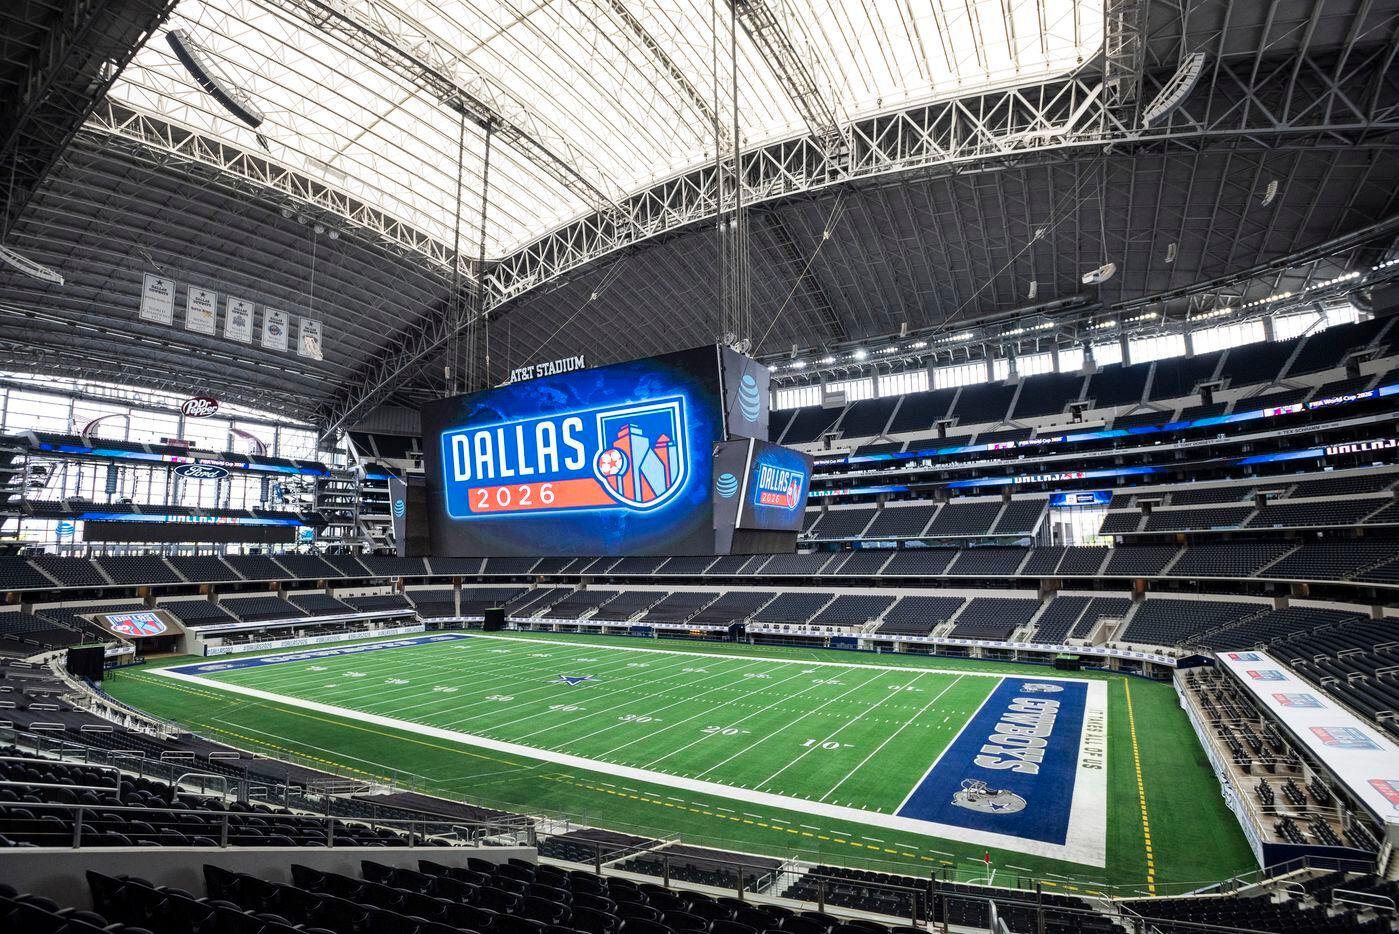 Dallas 2026 candidate host city logos are on display on the giant video board at AT&T...